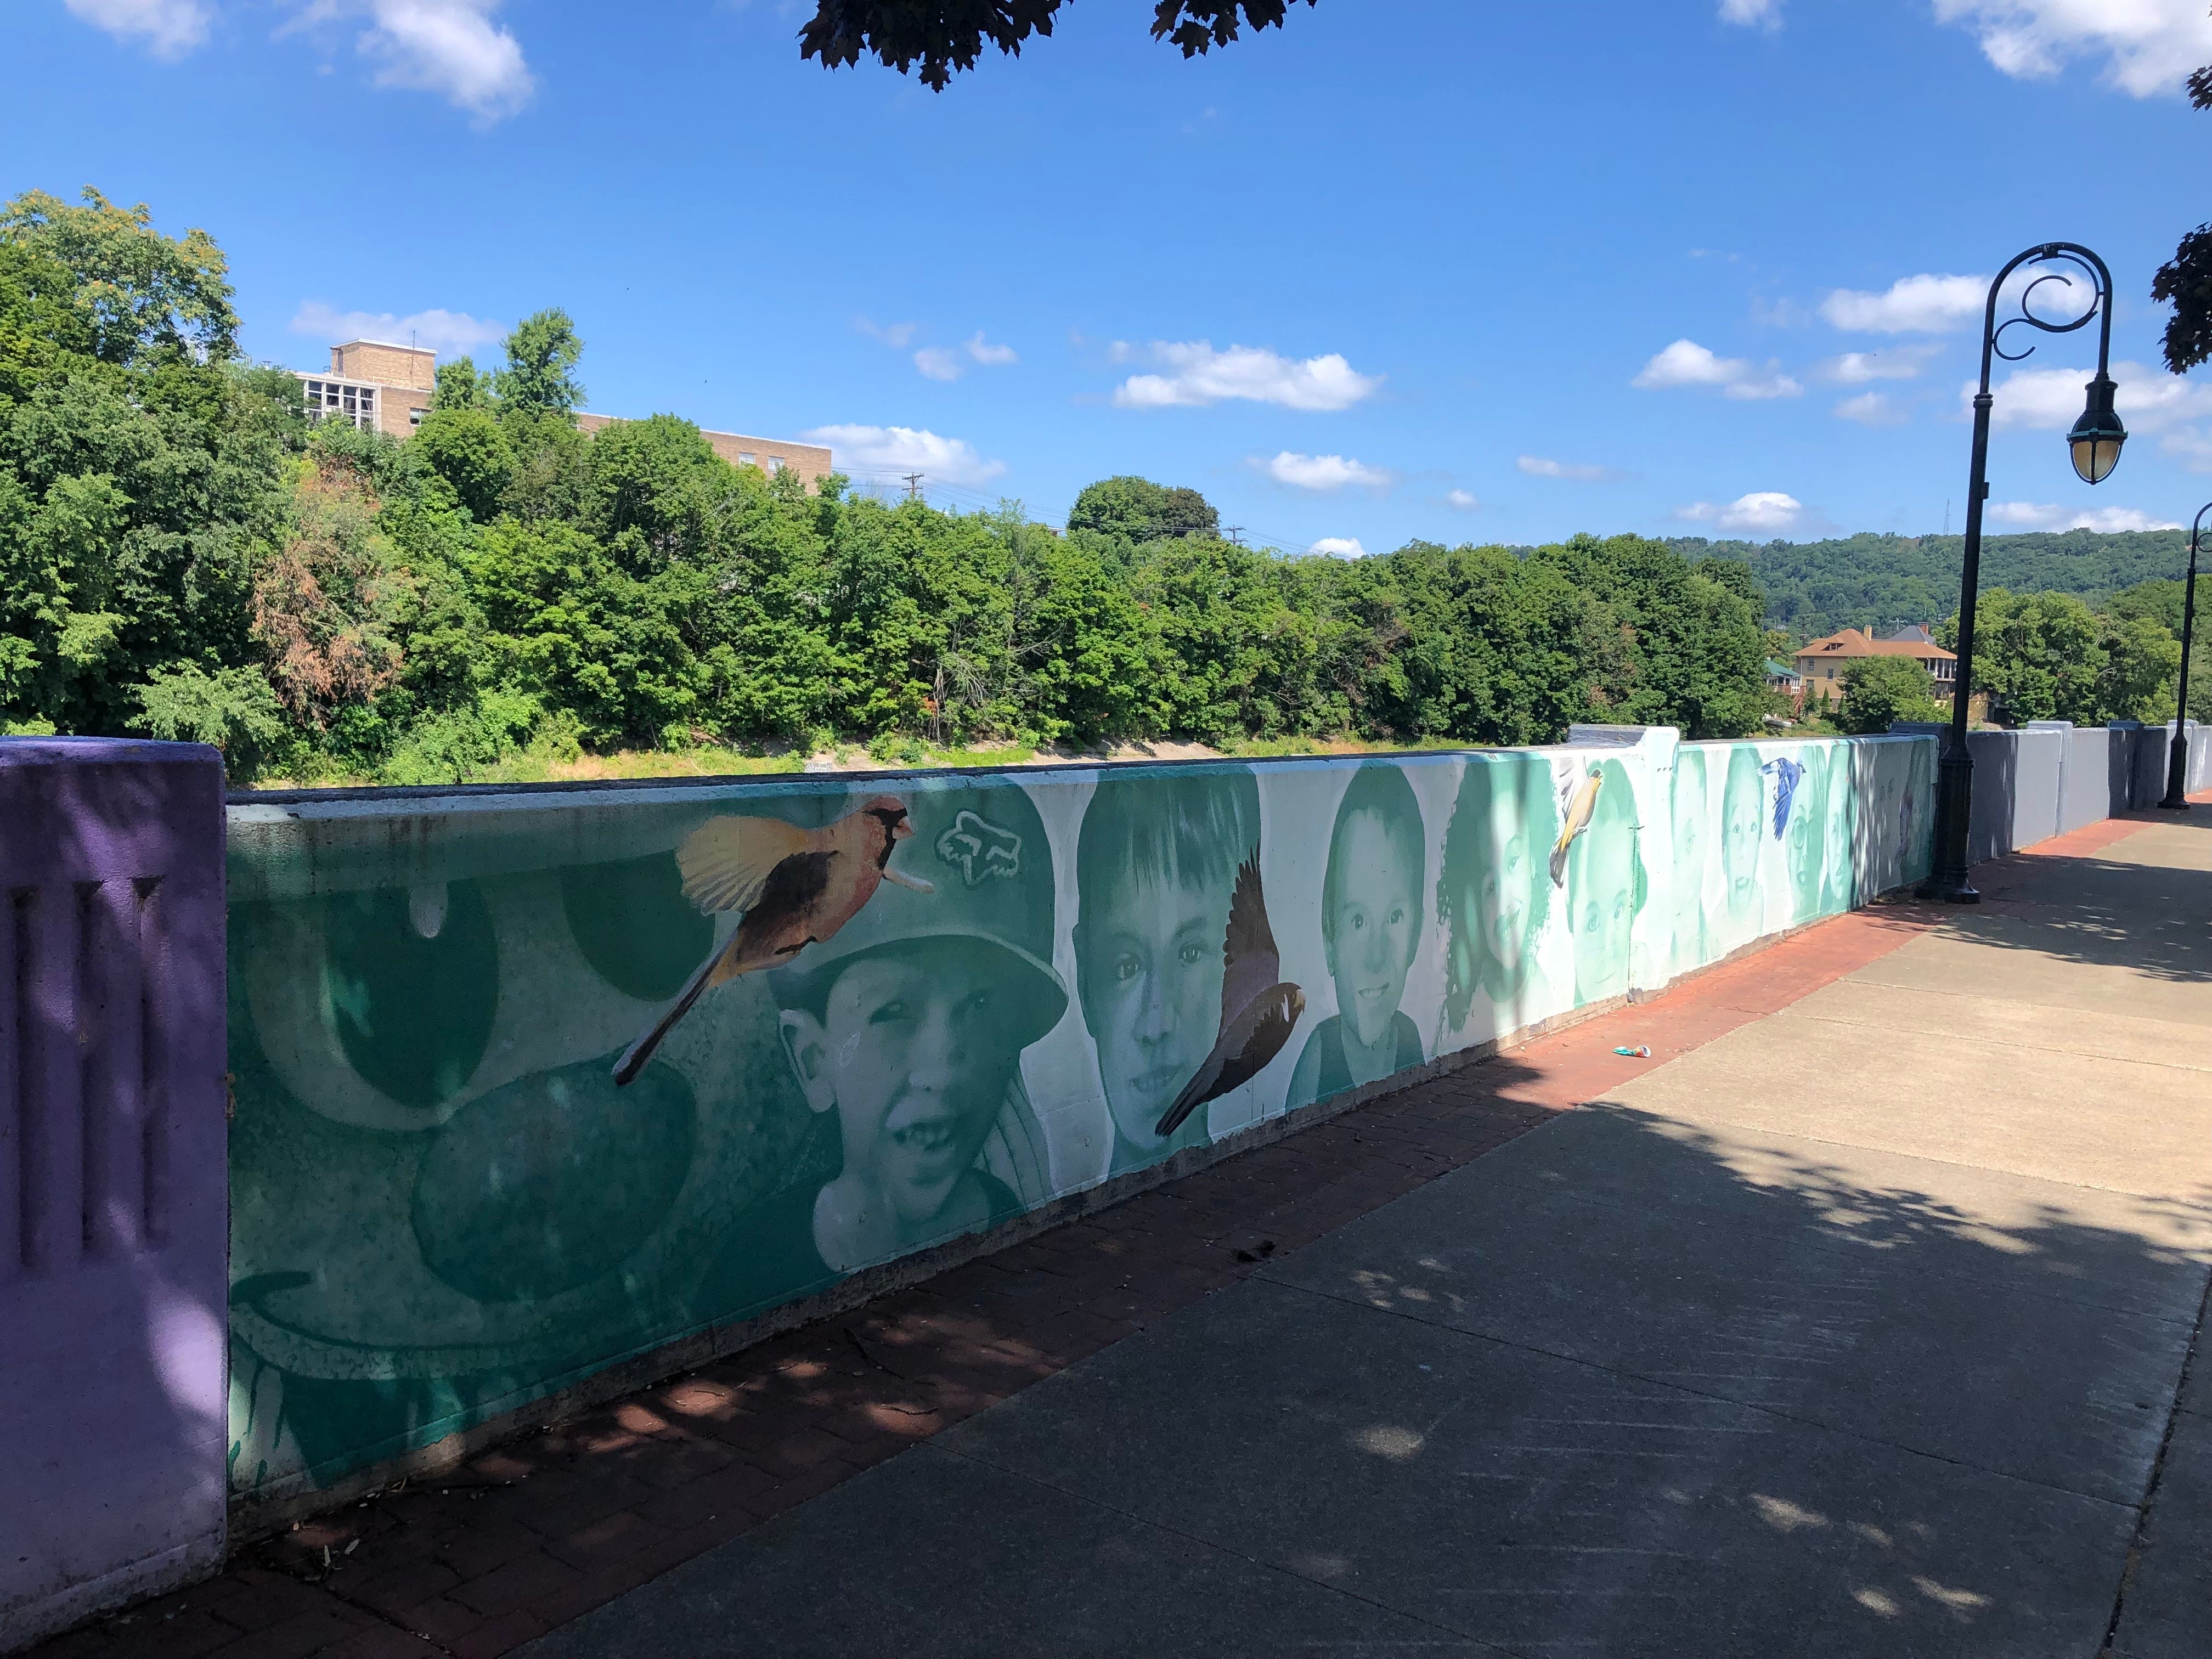 Children's faces and birds line part of the floodwall along the Chenango River in downtown Binghamton.